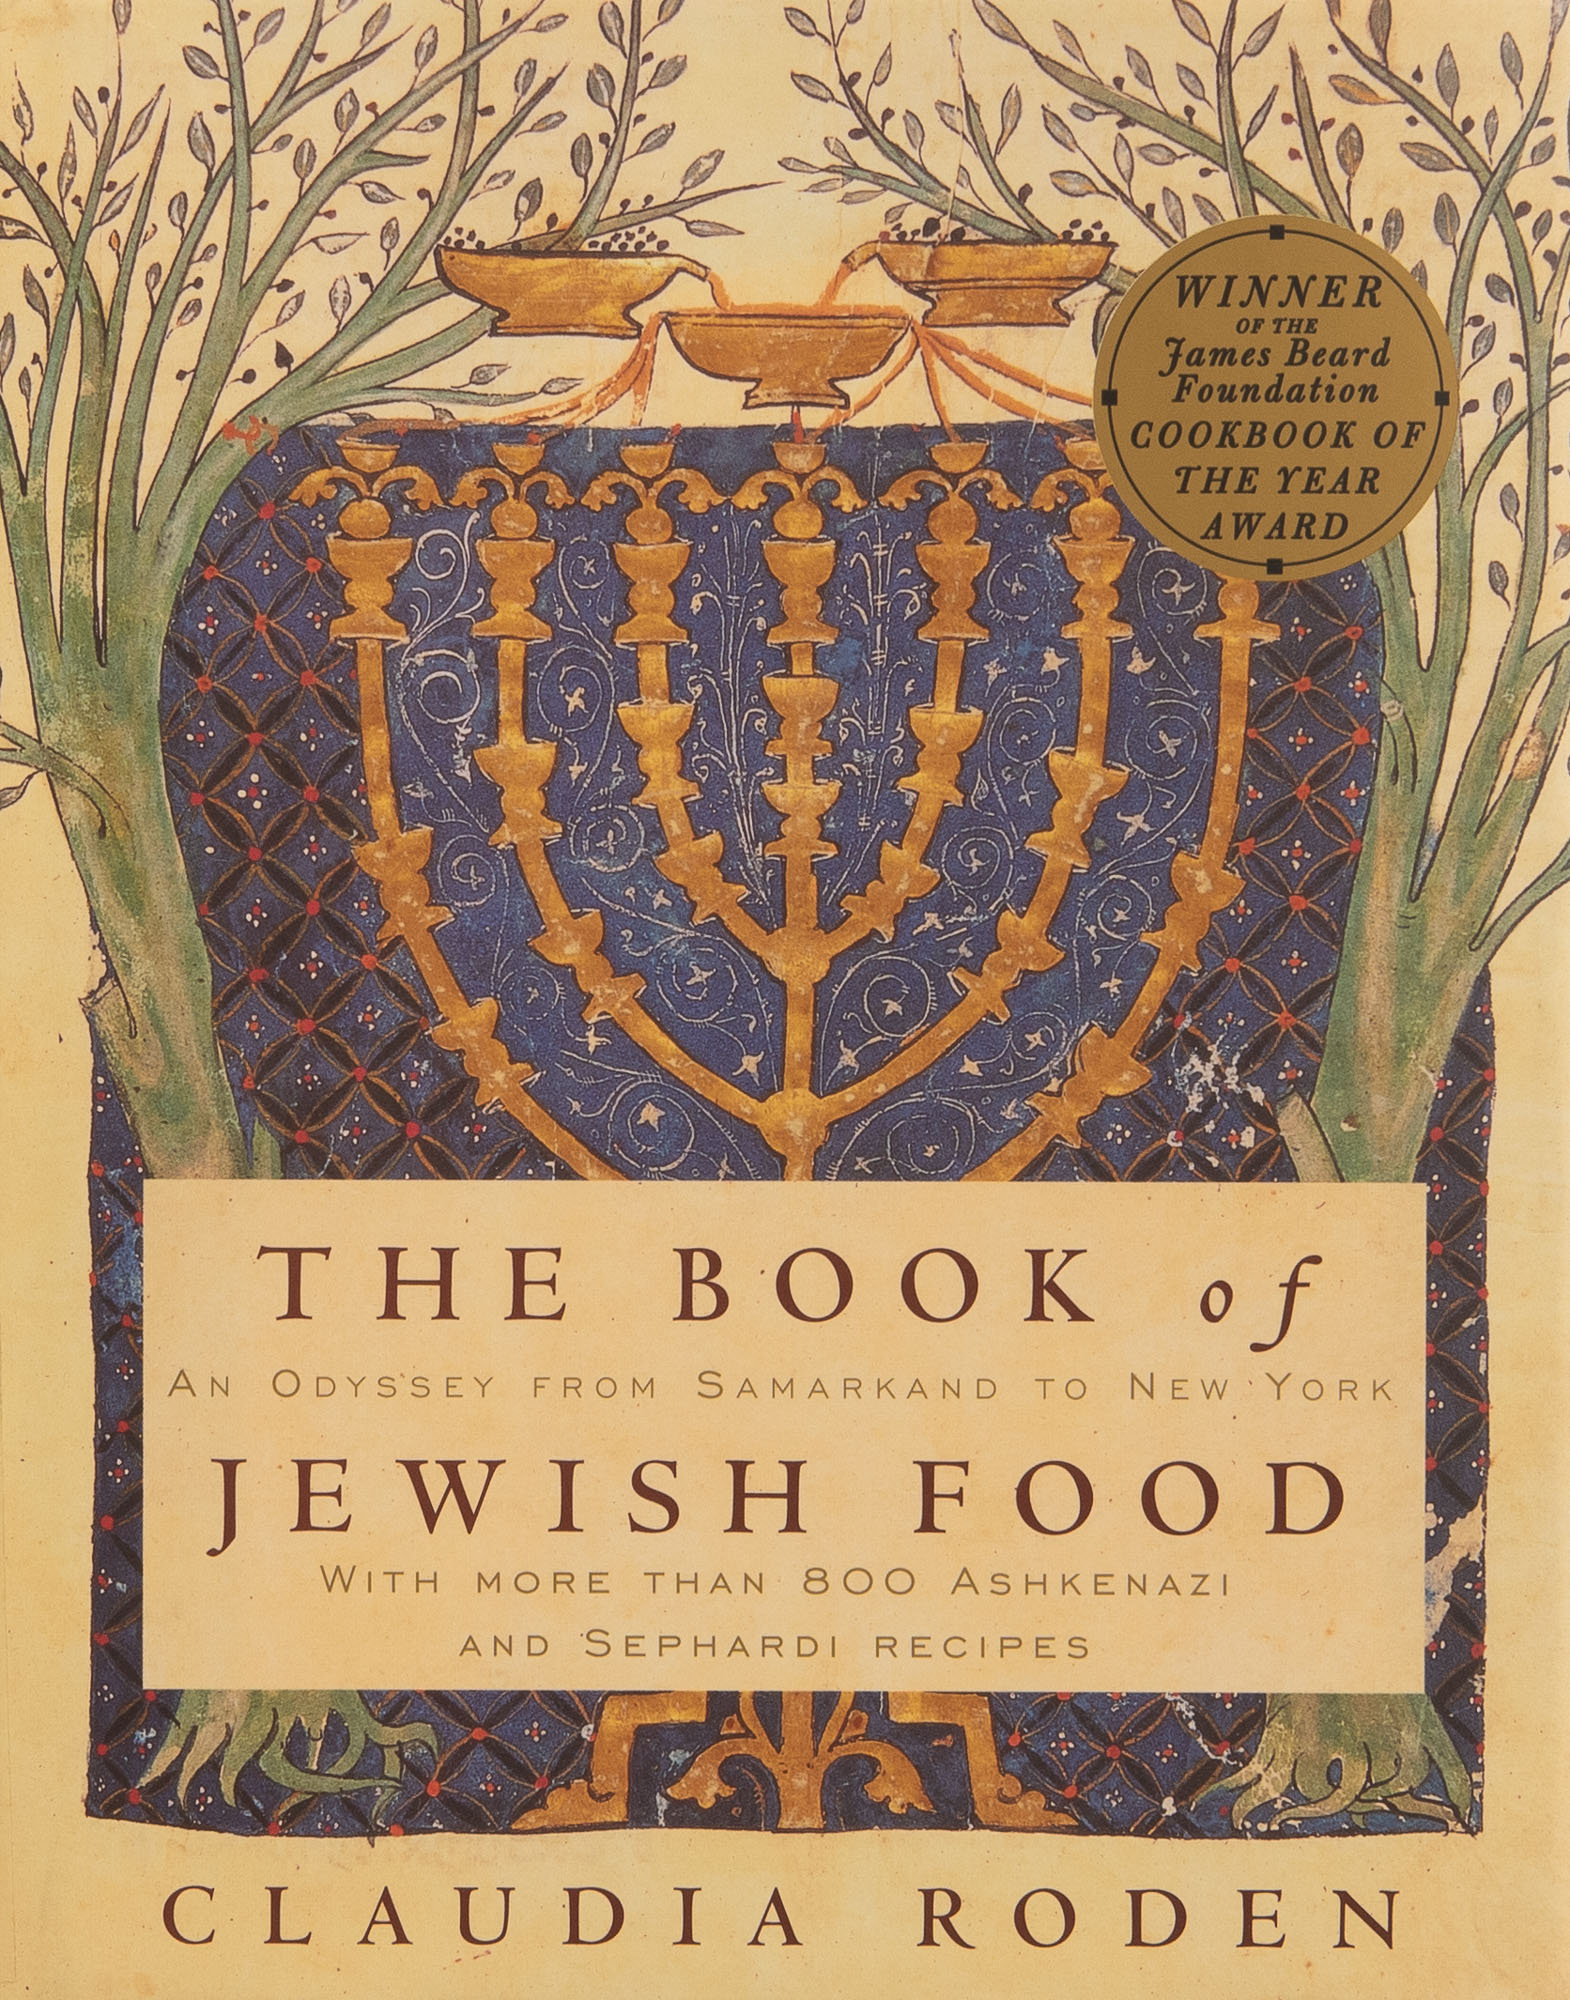 The cover of The Book of Jewish Food an Odyssey From Samarkand to New York